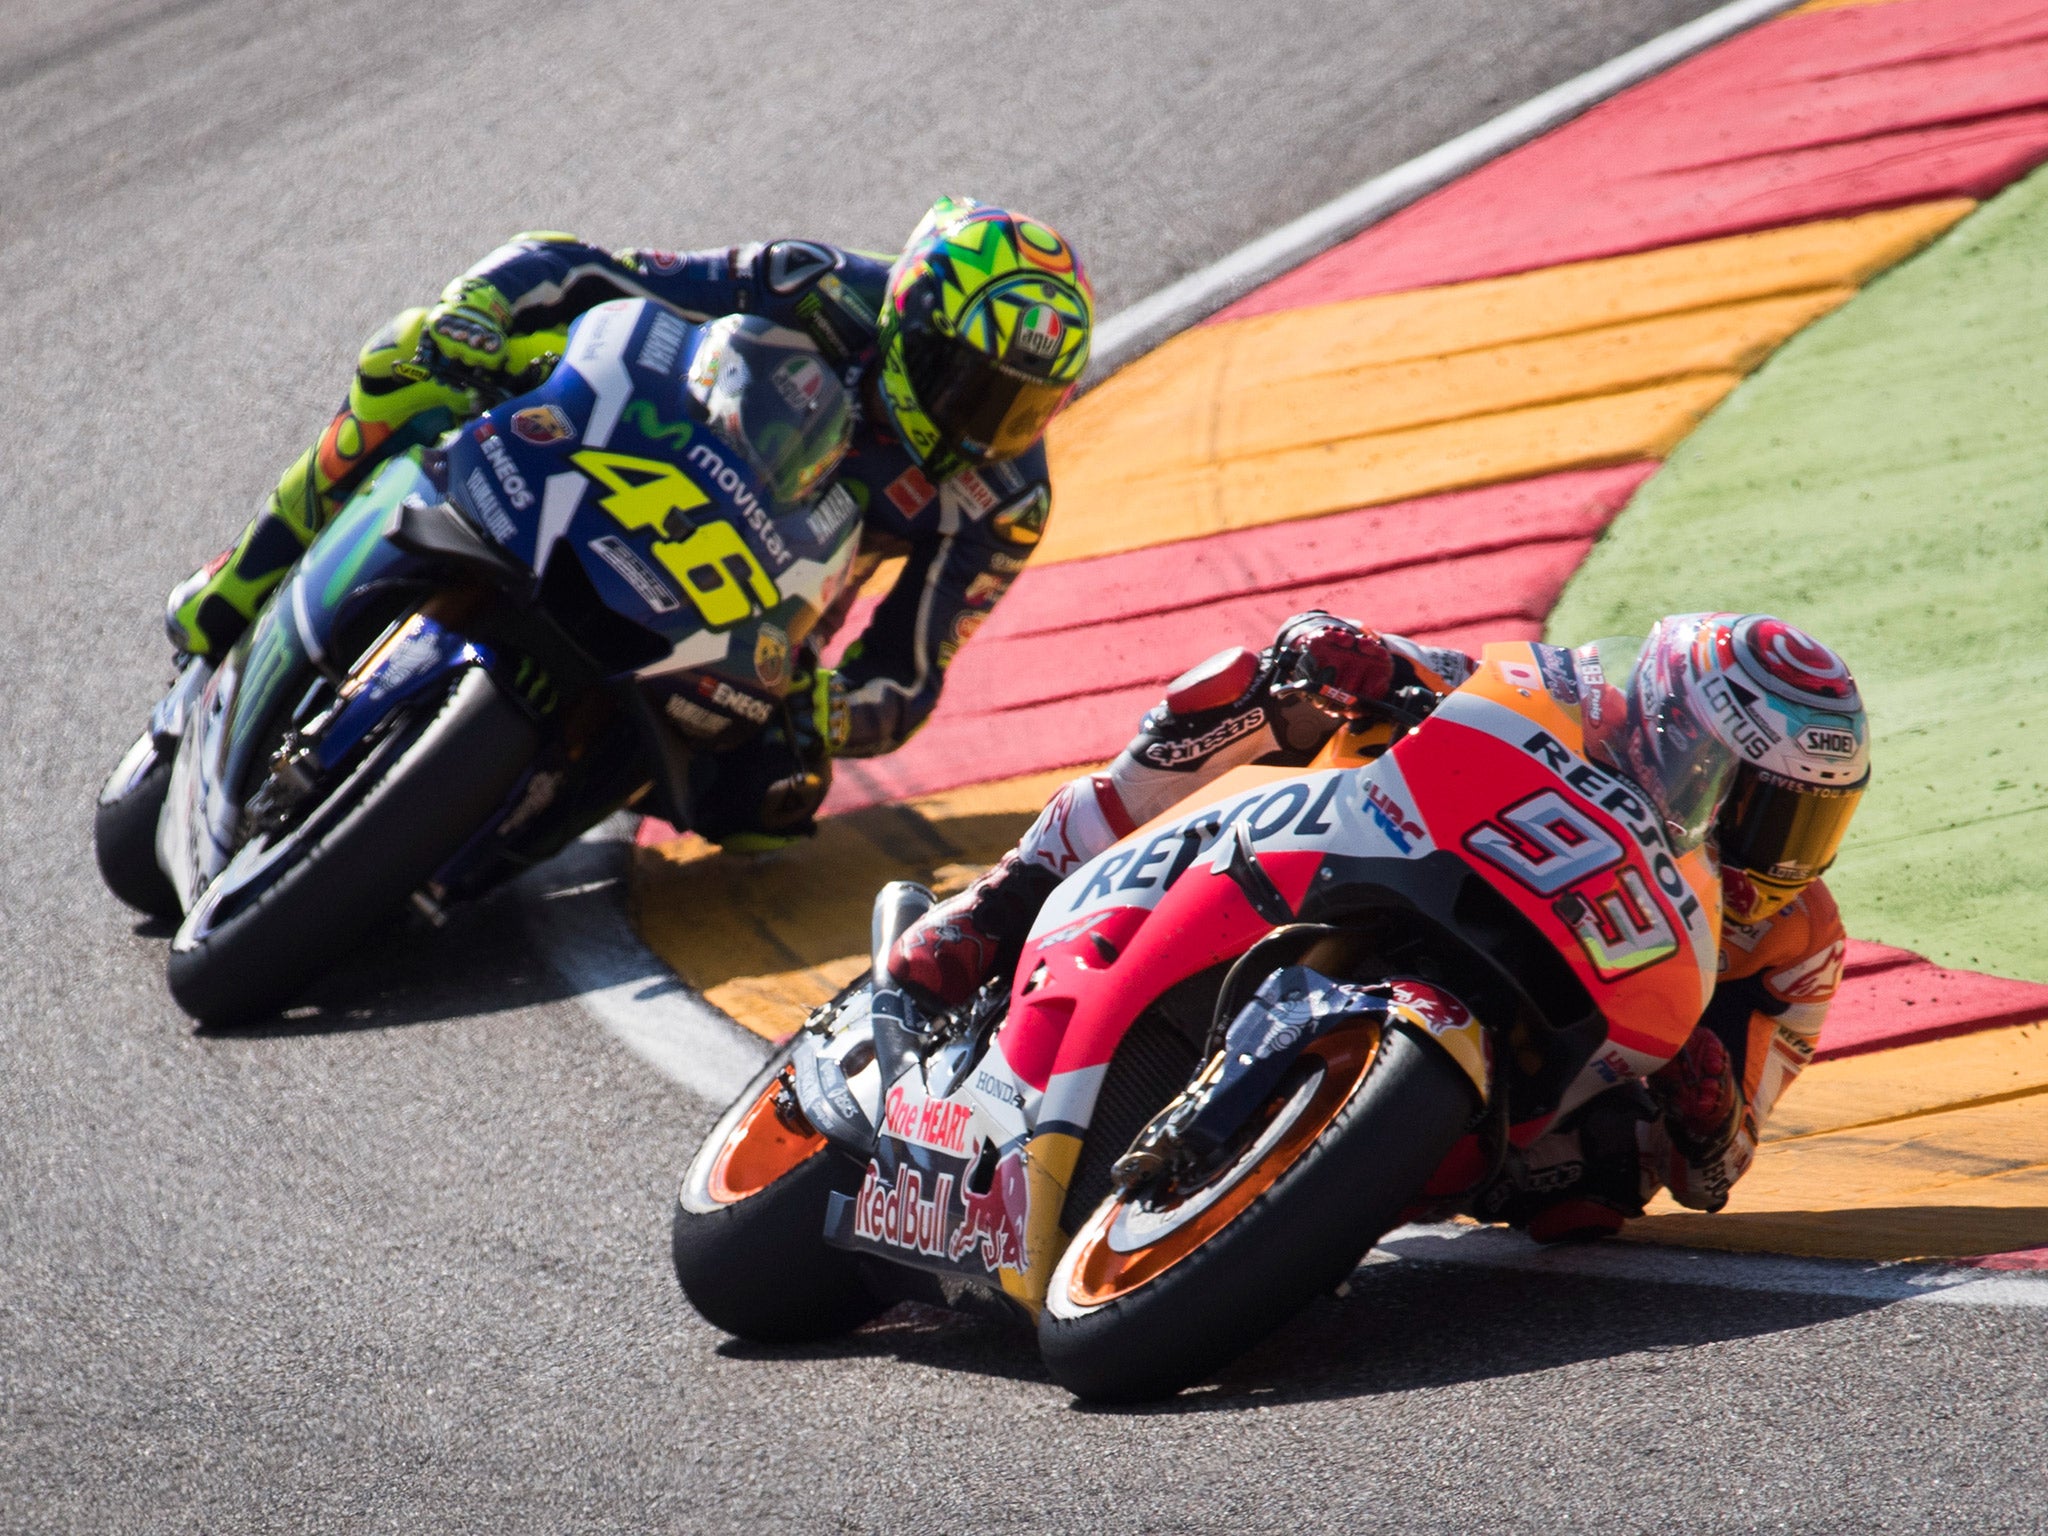 Marquez passed Rossi to take a lead he would not relinquish